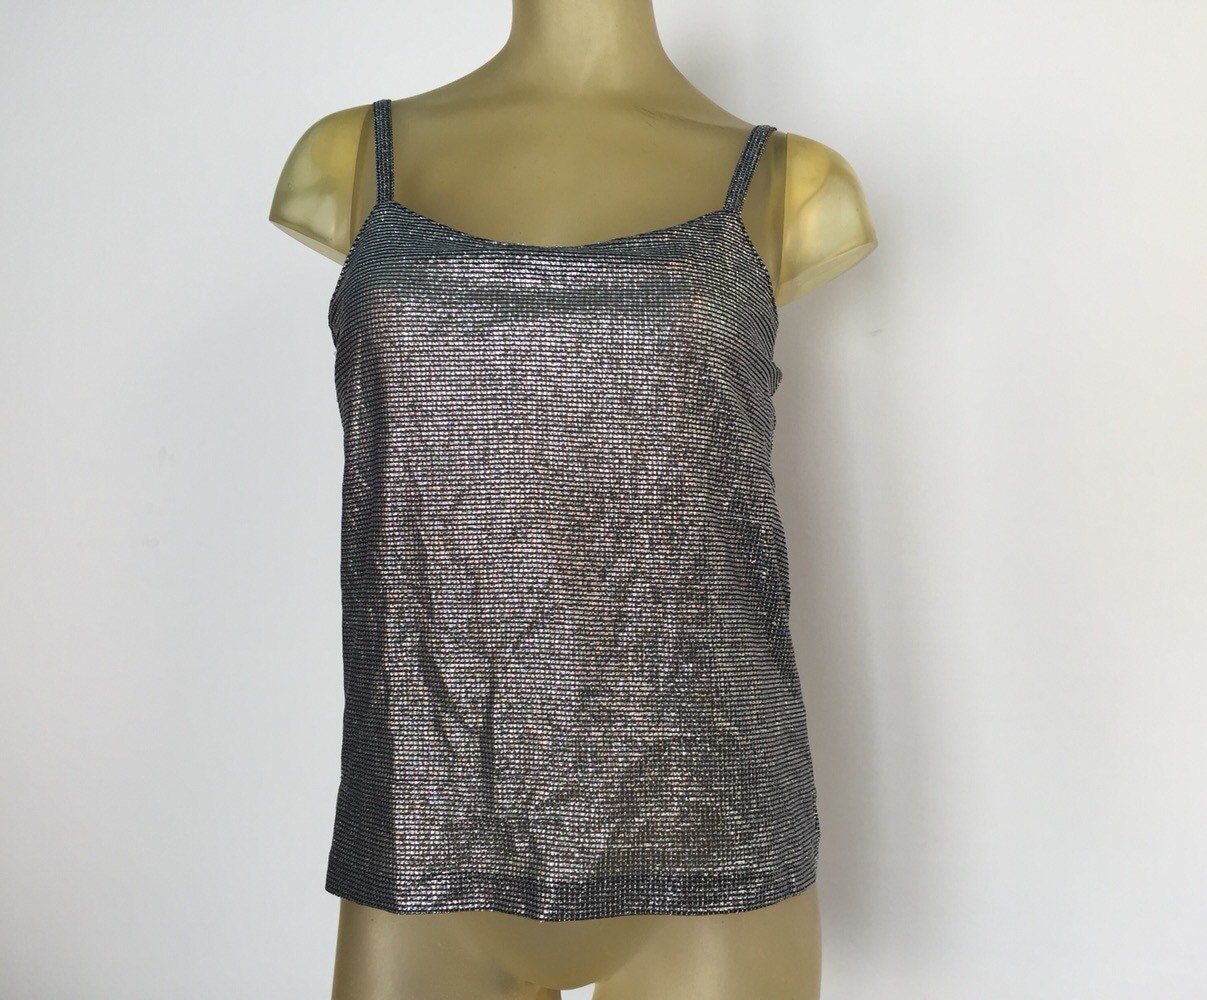 Sparkly Silver Tank Top Silver Lame Camisole Built in Shelf